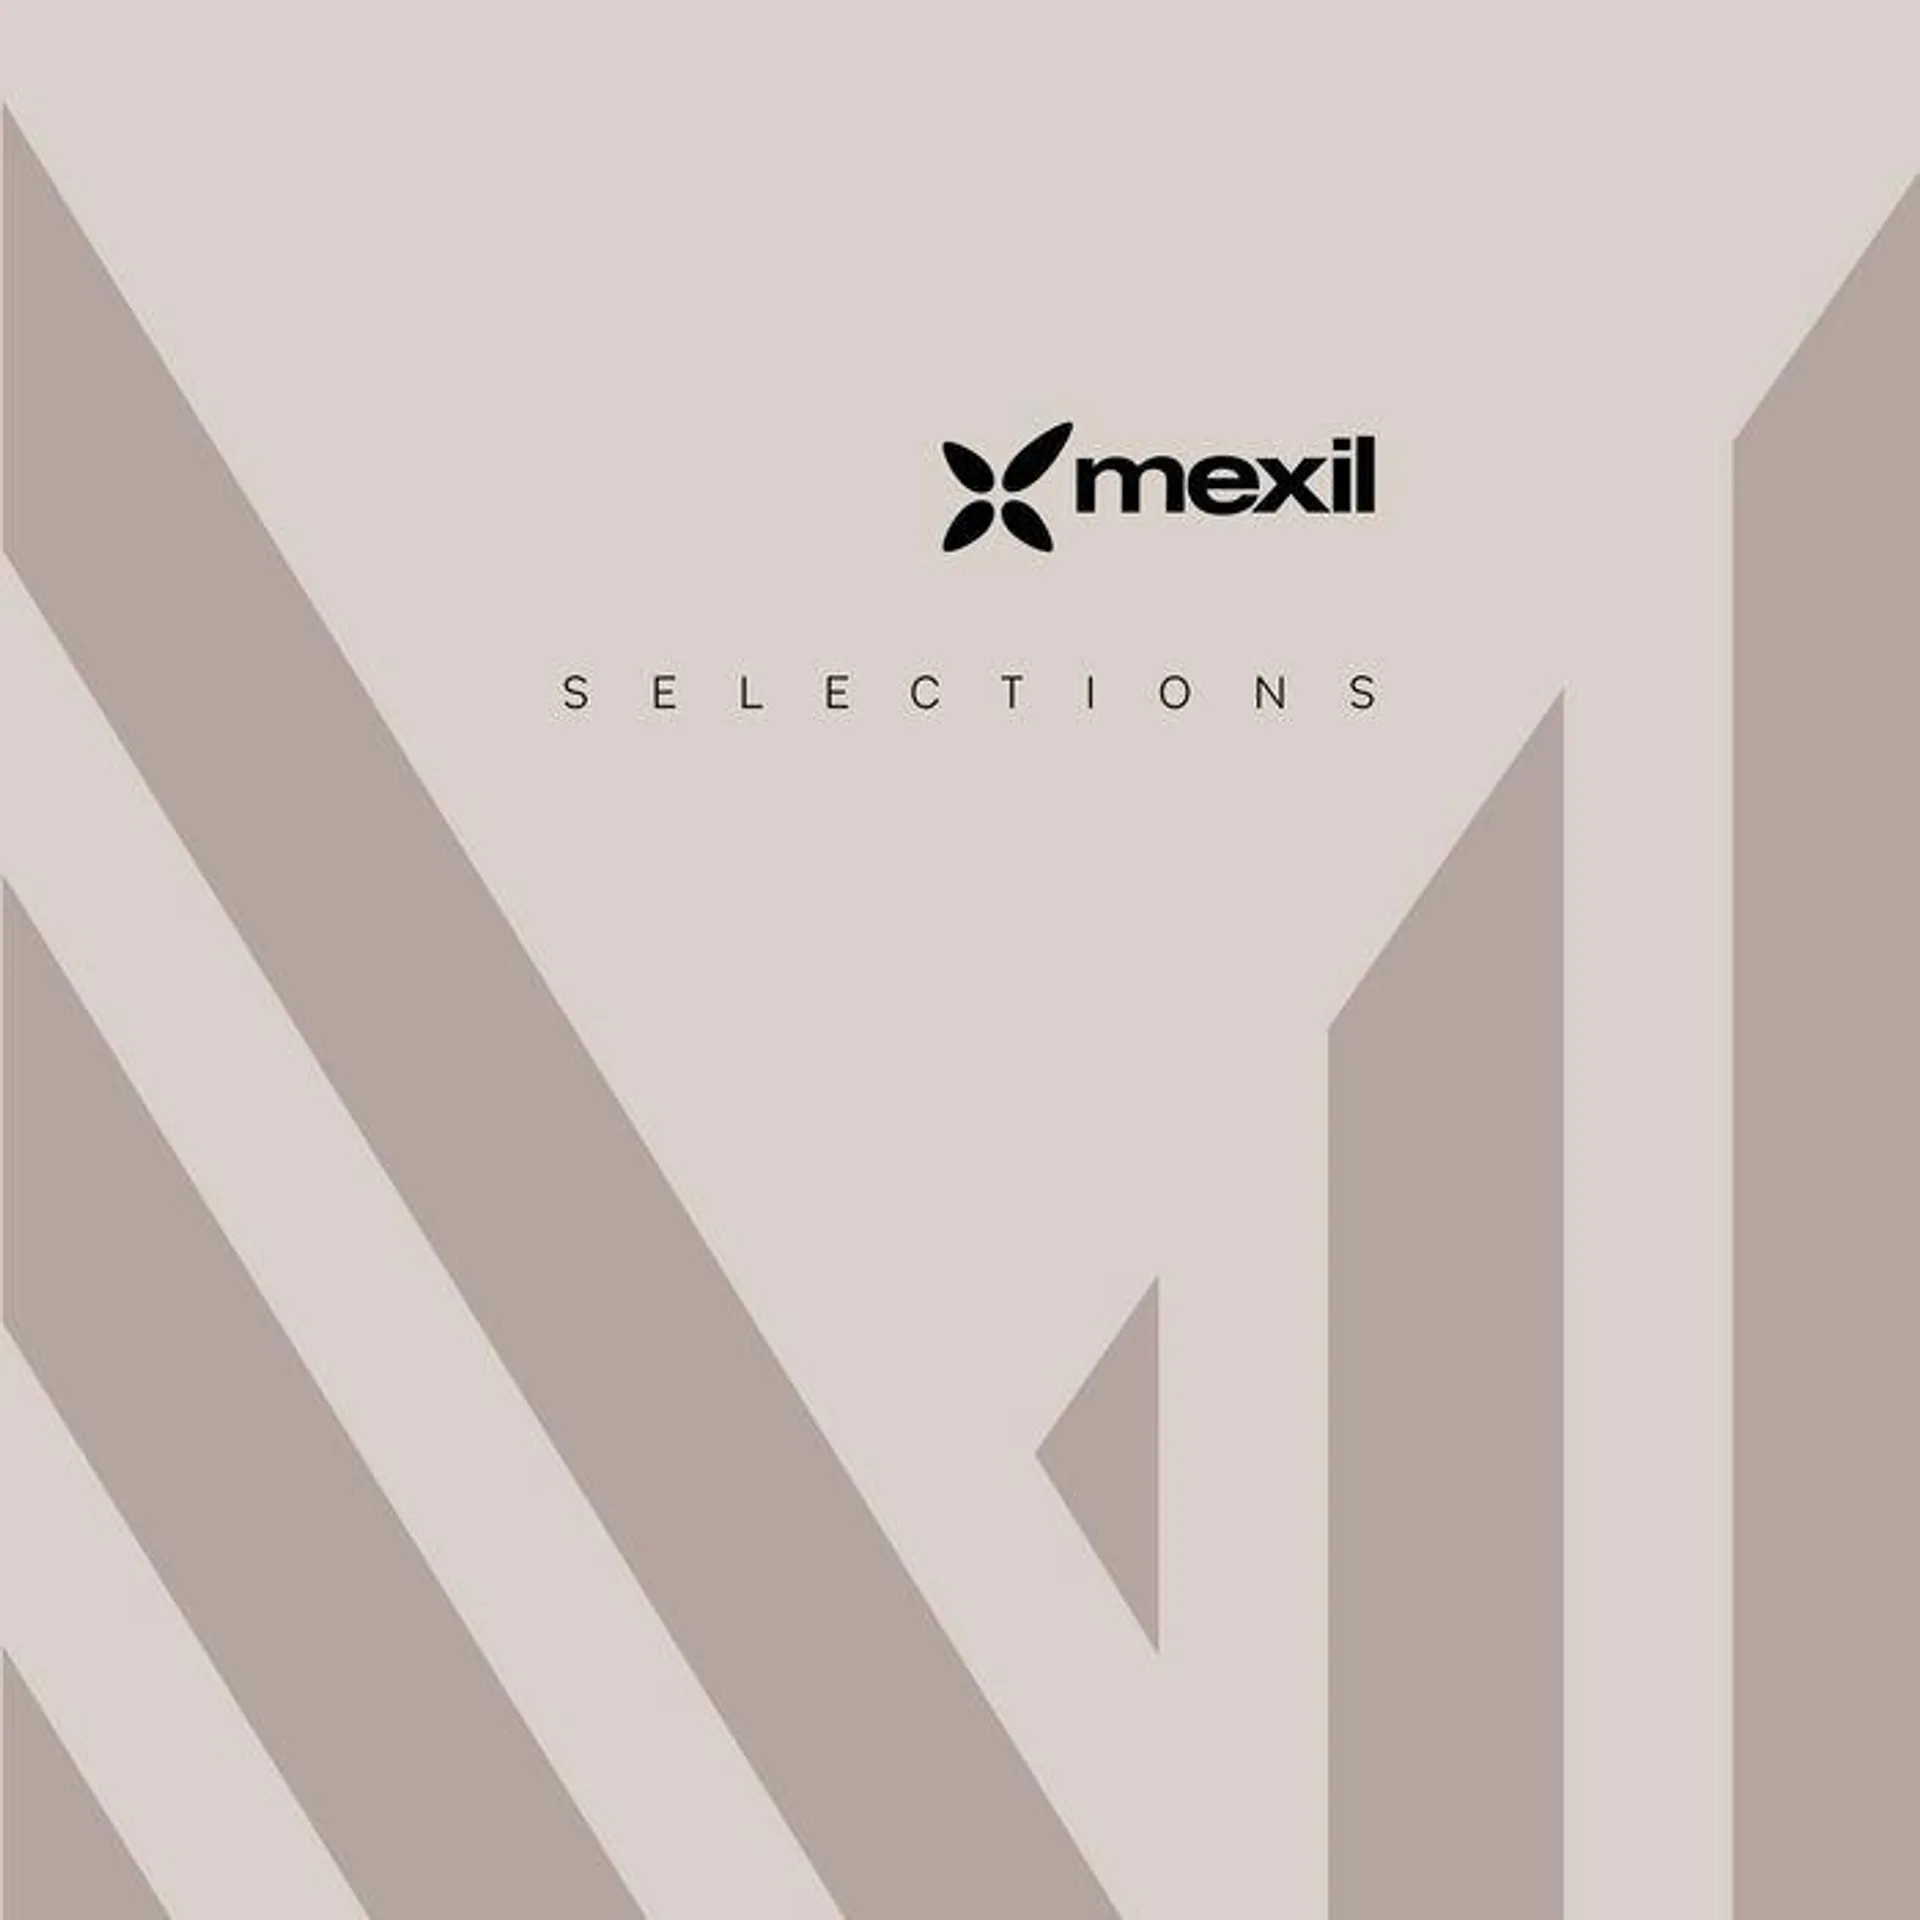 Mexile selections  - 1